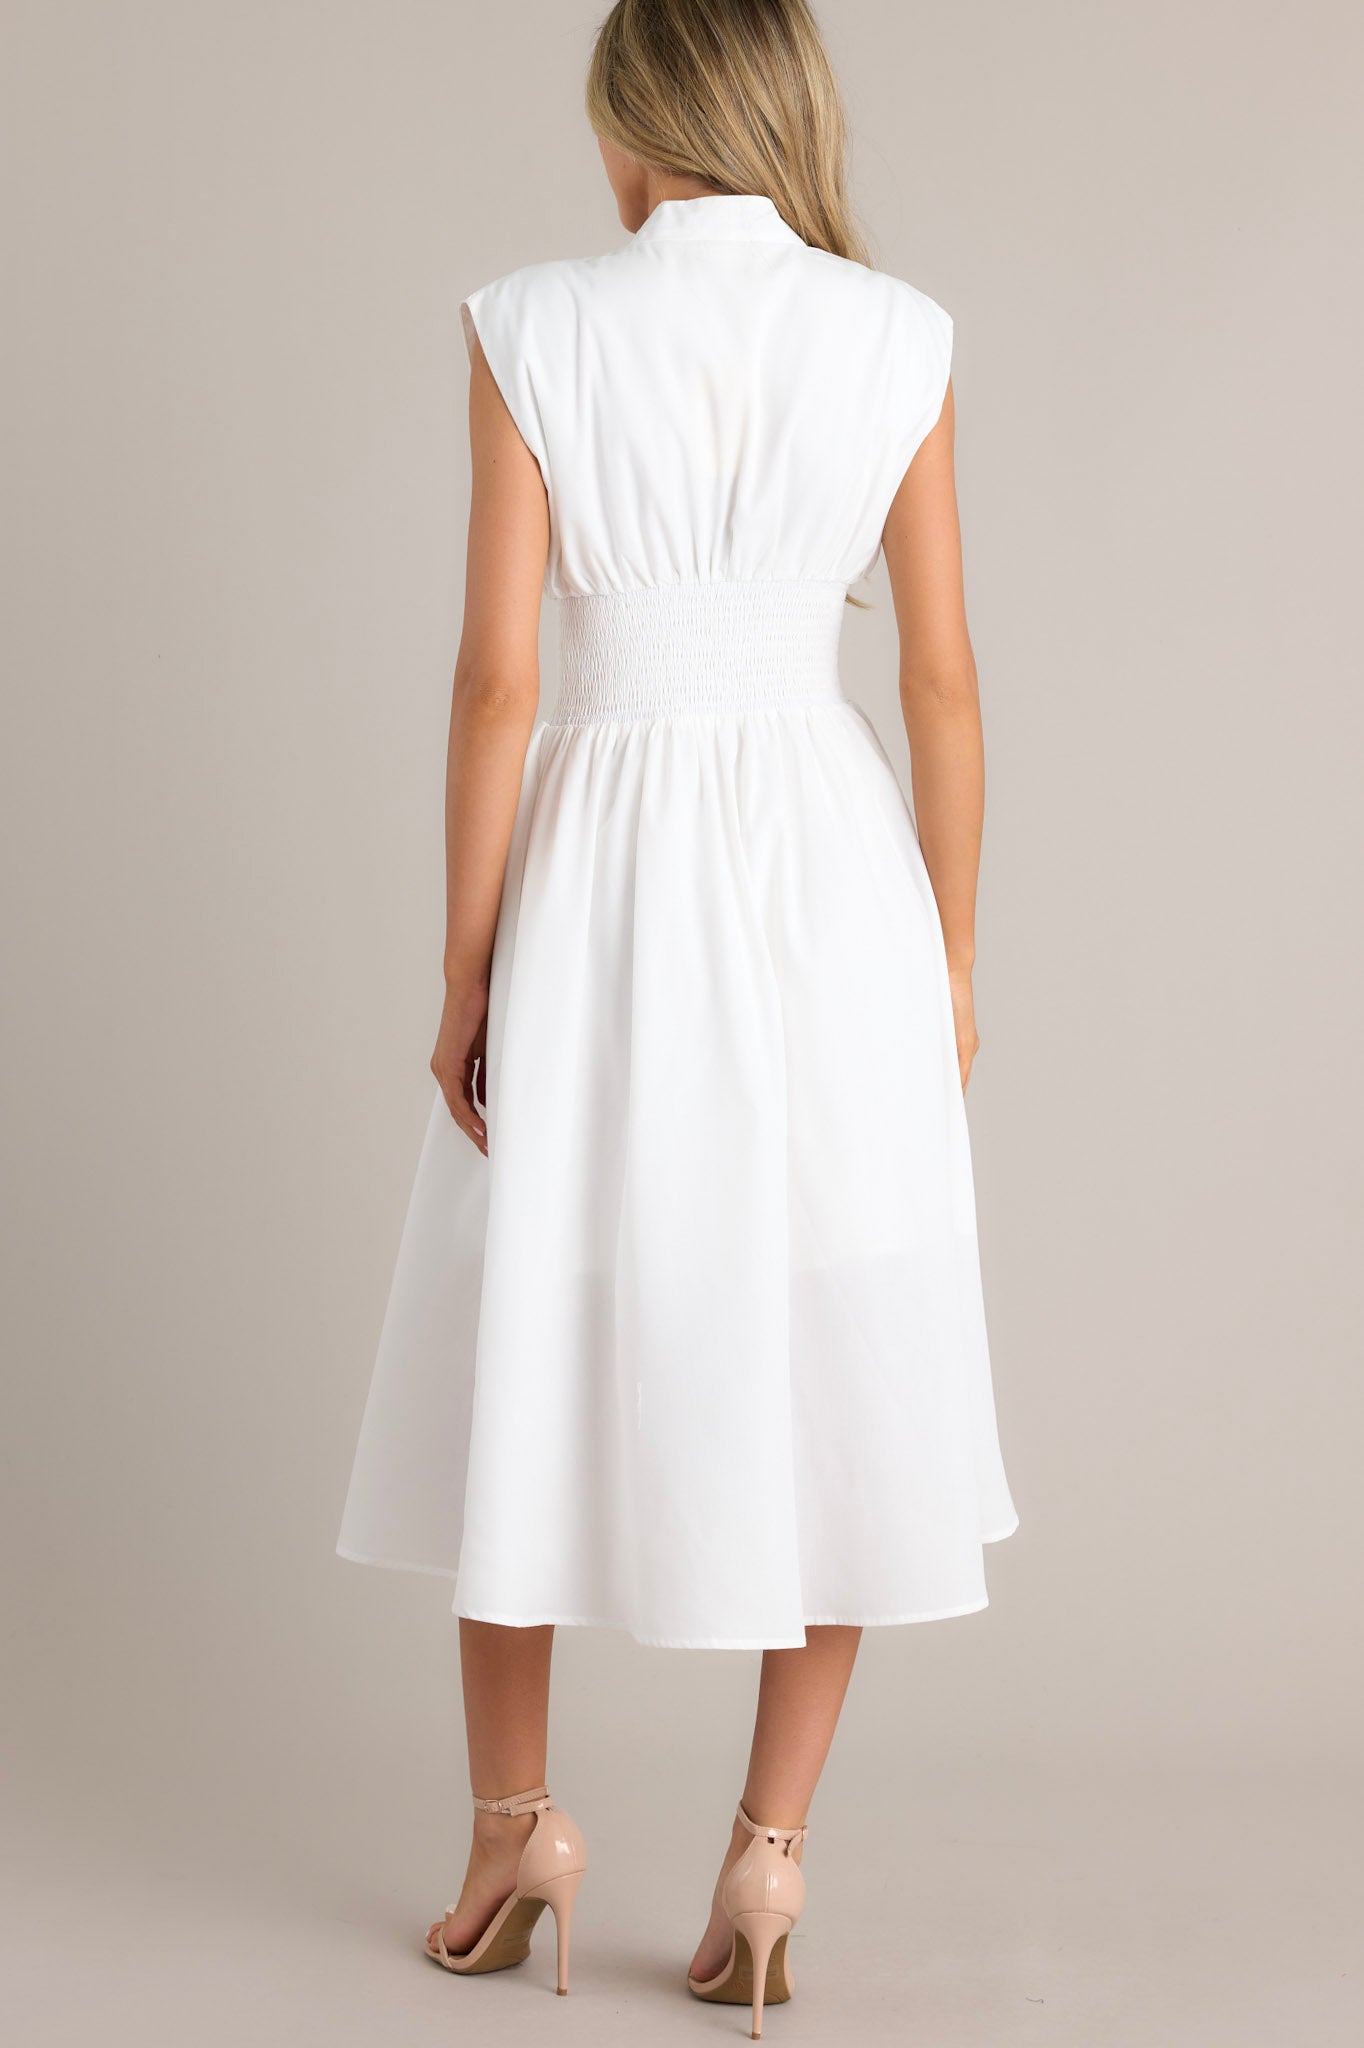 Back view of this white dress with a V-neckline, cap sleeves, a zippered front, and a cinched waist with shirred detailing, featuring a flowing midi-length skirt with a front slit.